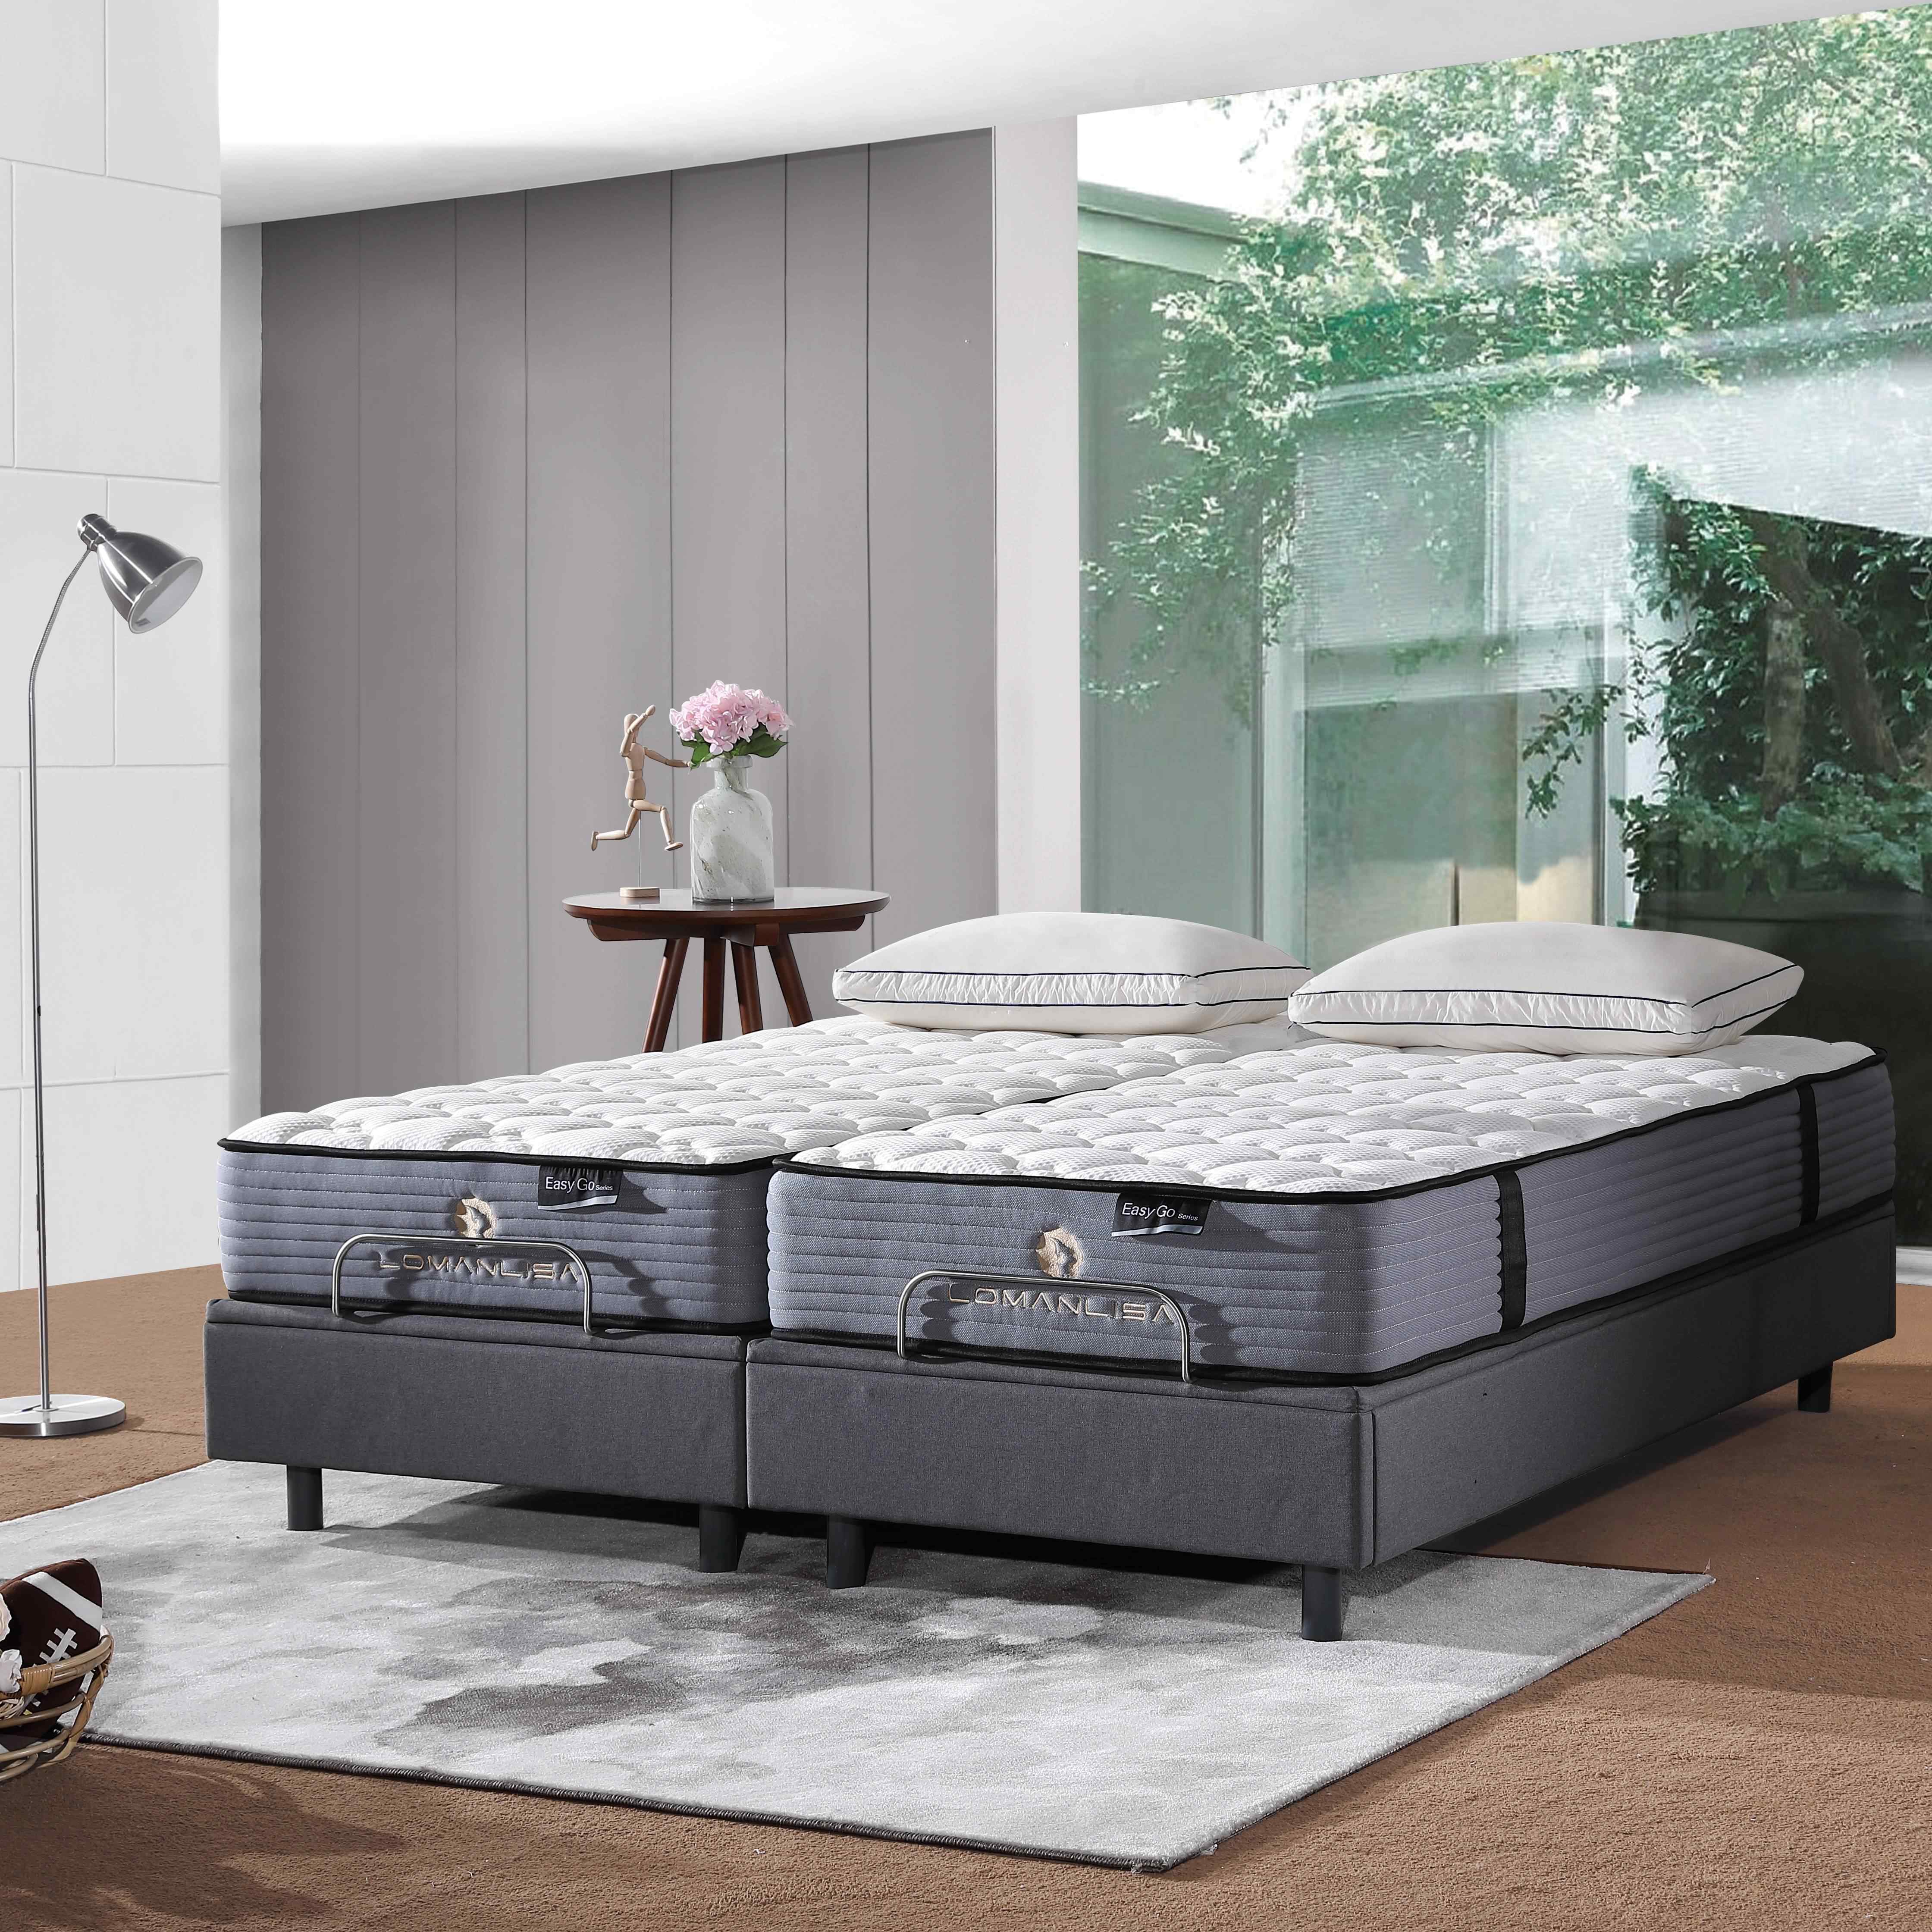 JLH electric mattress warehouse locations Certified for bedroom-2